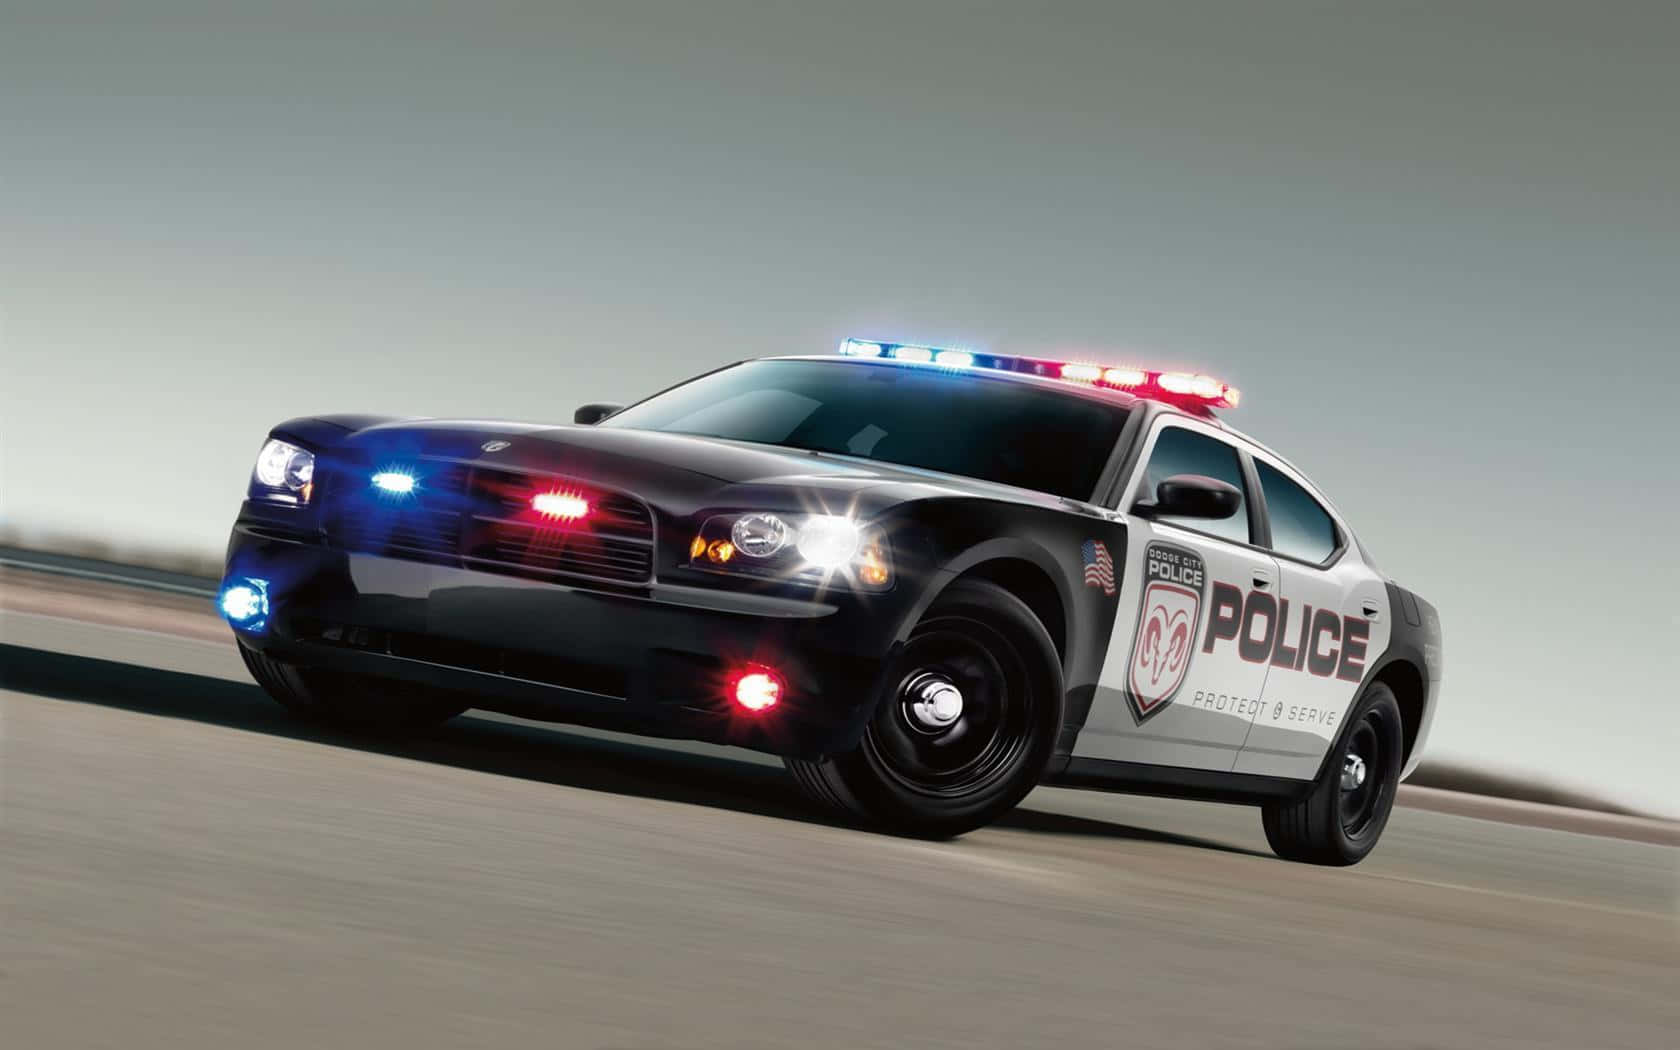 “The Finest on the Beat: A High-Speed Police Car”